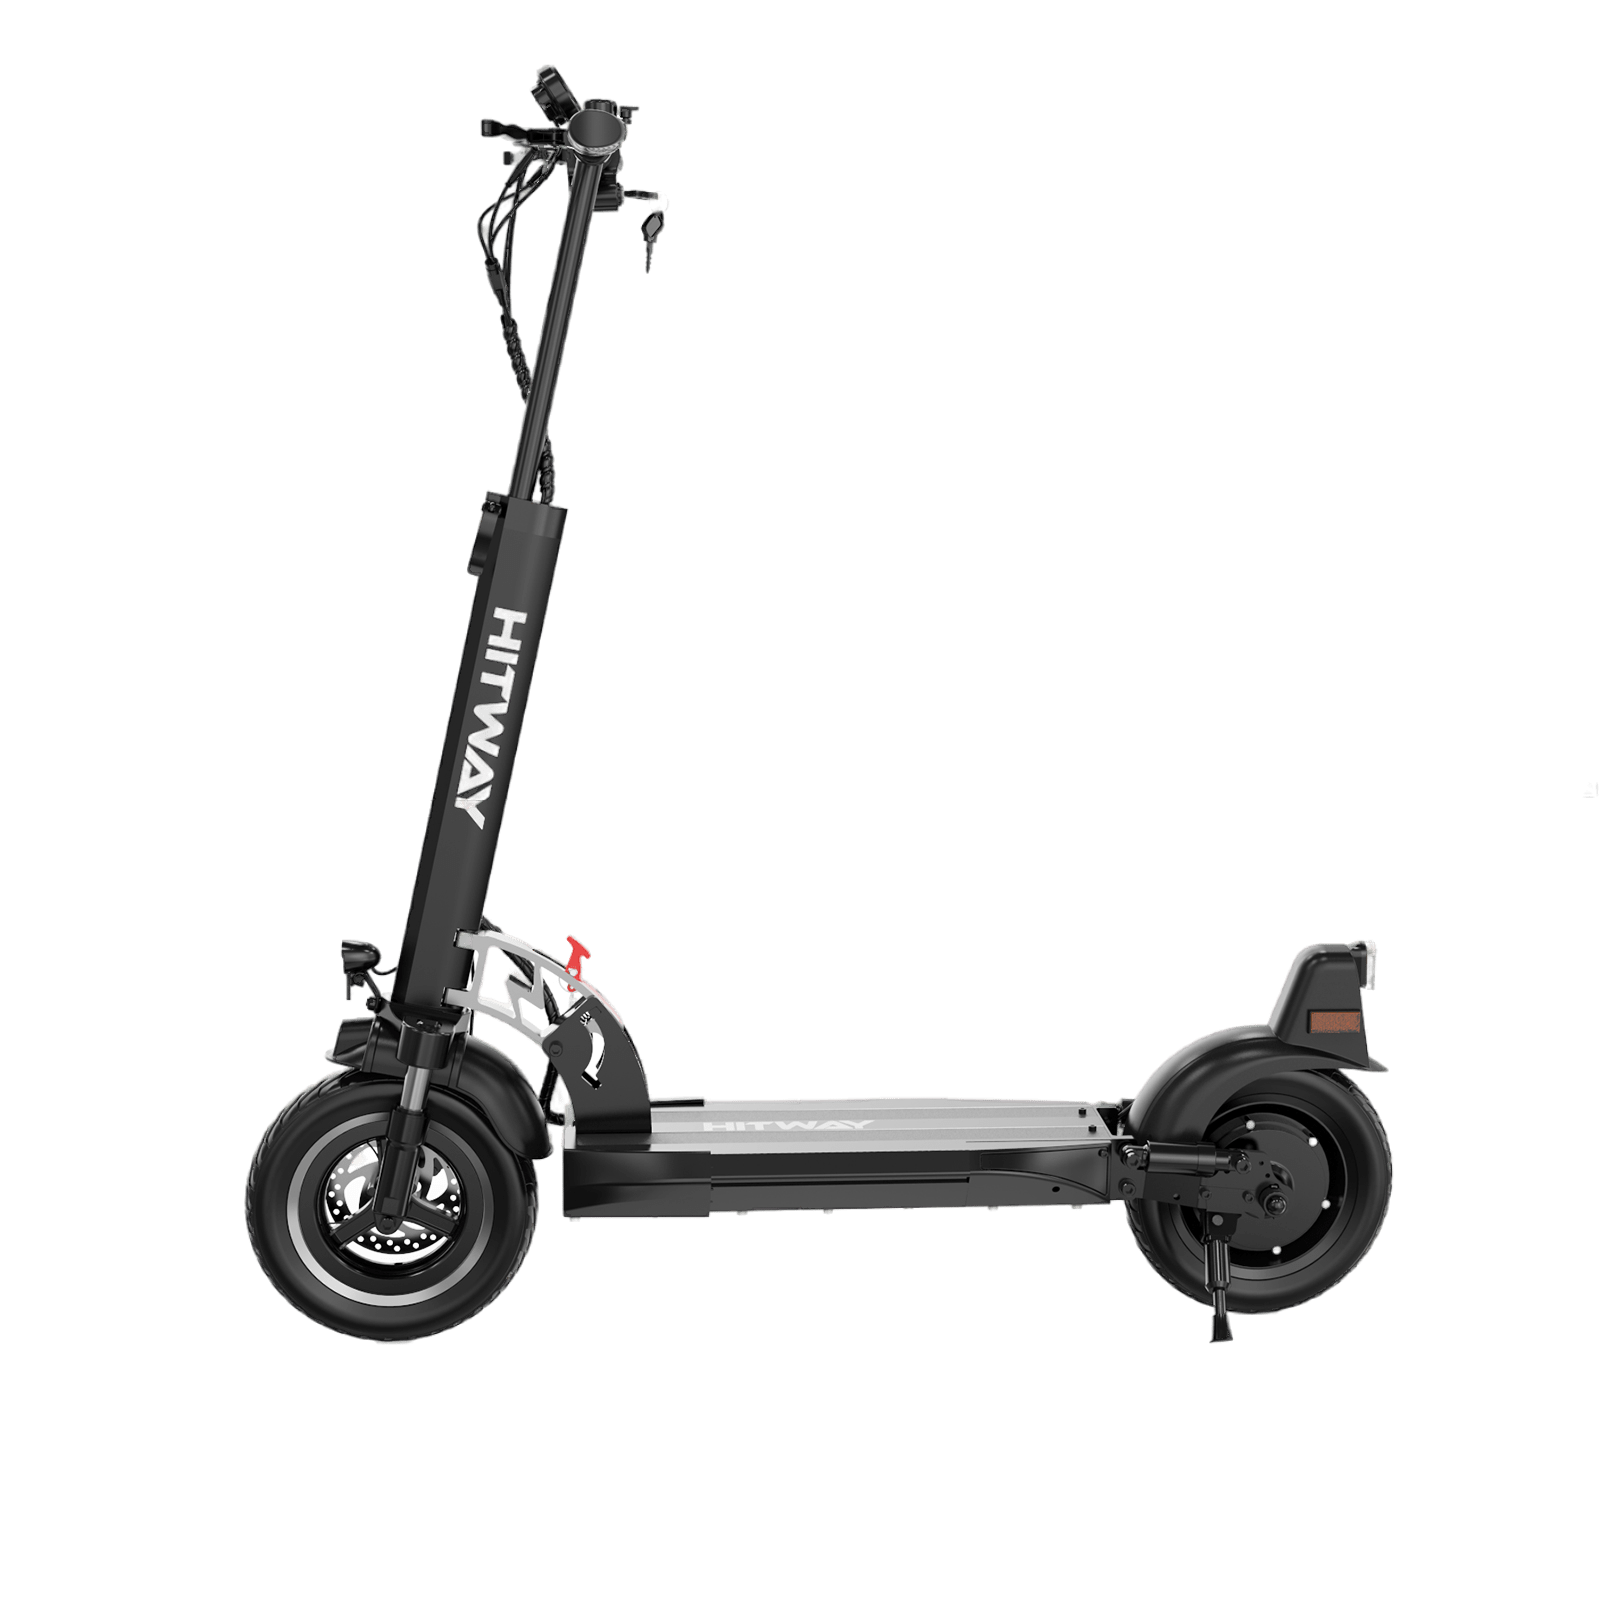 HITWAY H5 Electric Scooter Straßenzulassung Zoll, ABE (10 E-Scooter Scooter mit E schwarz)